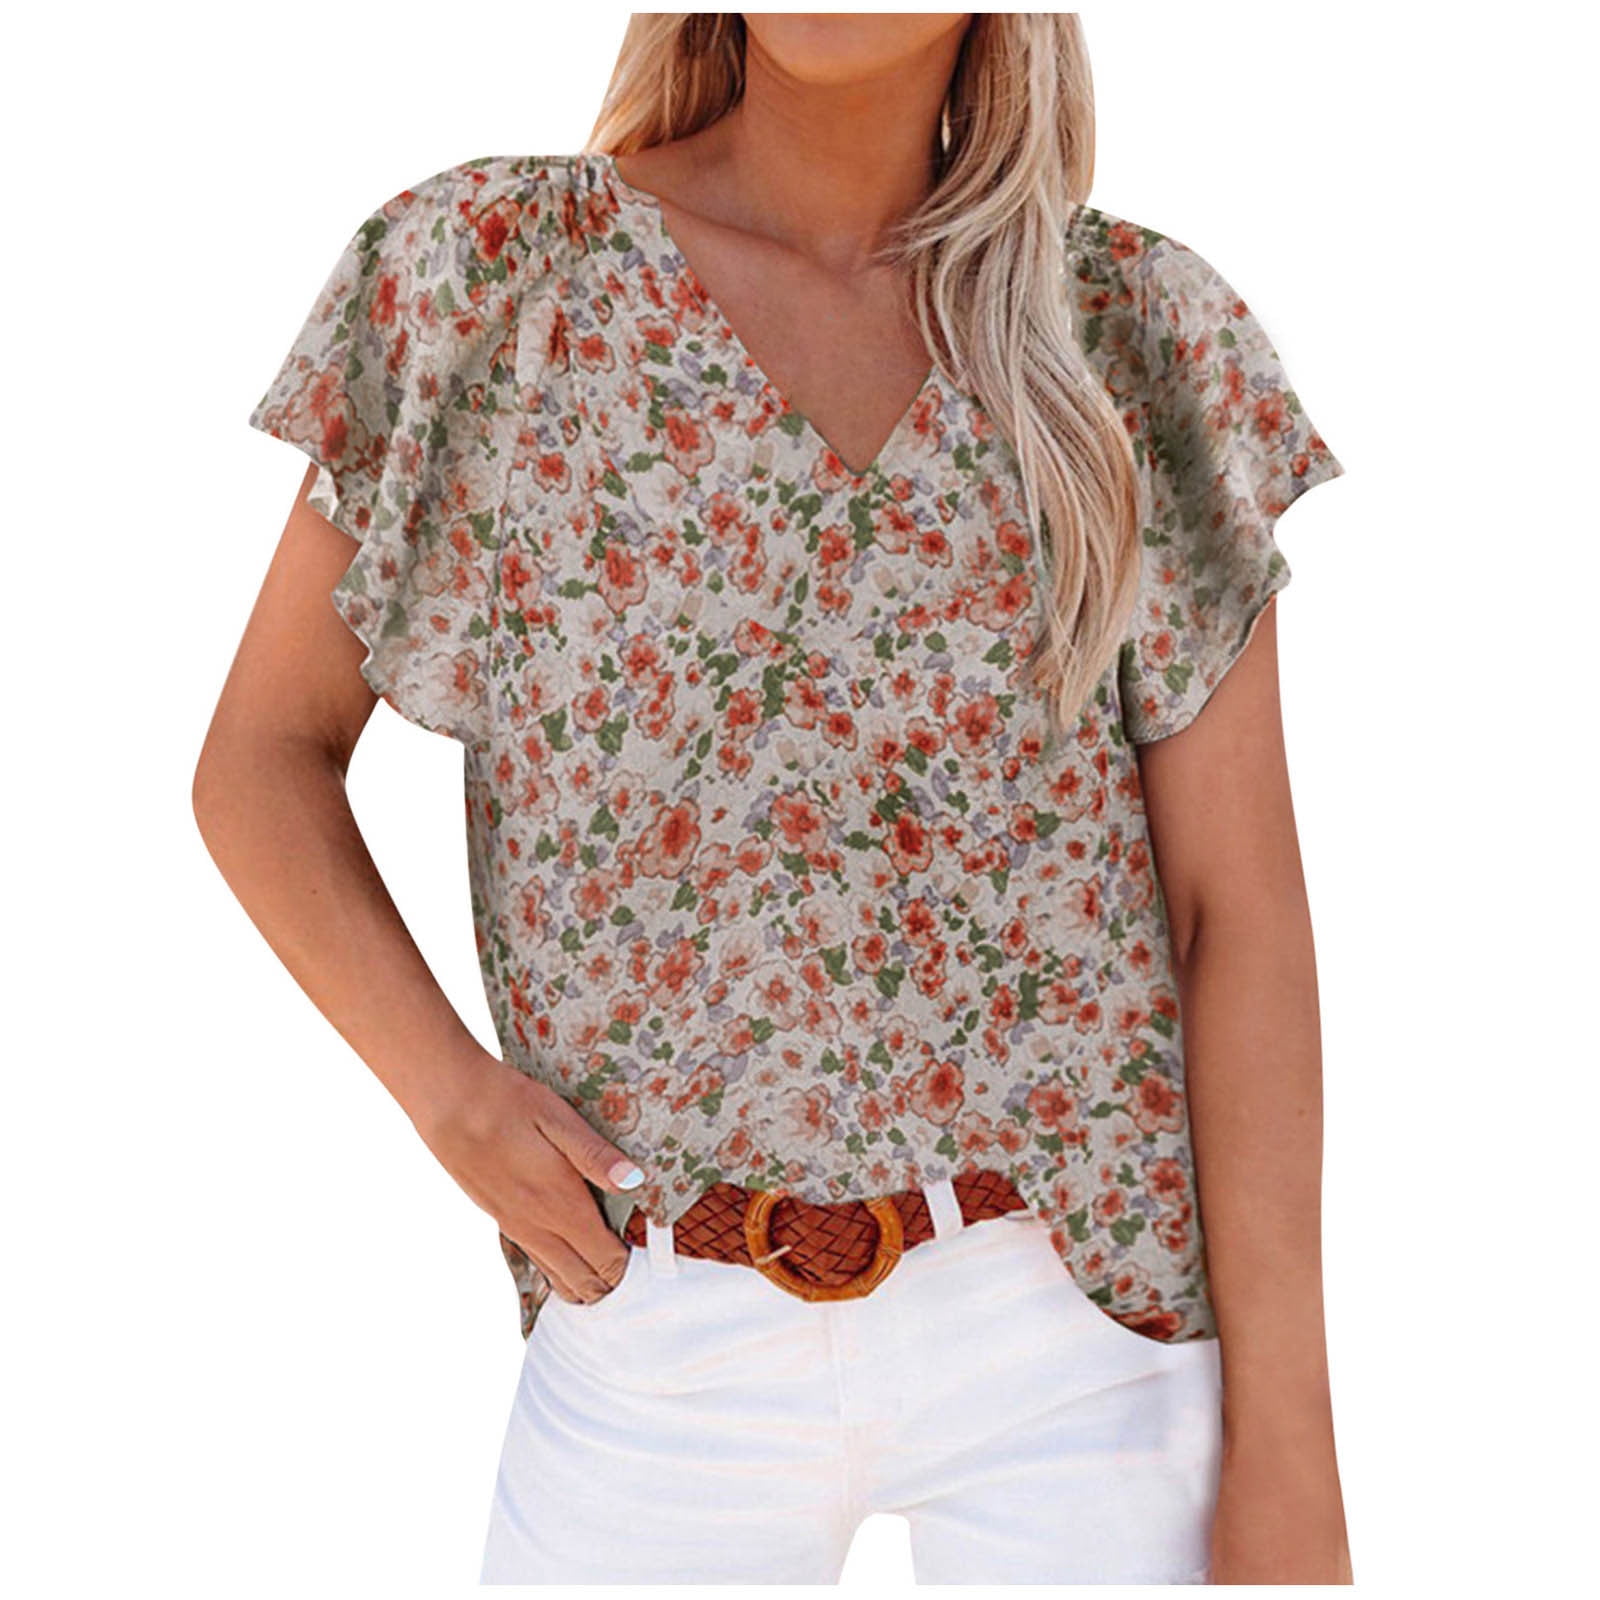 Black and Friday Discounted Items under $5 GaThRRgYP Women's Summer Tops  Clearance Under $5,Woman's Casual Fashion Color Matching Zipper Short  Sleeve Summer Tops T-Shirt 